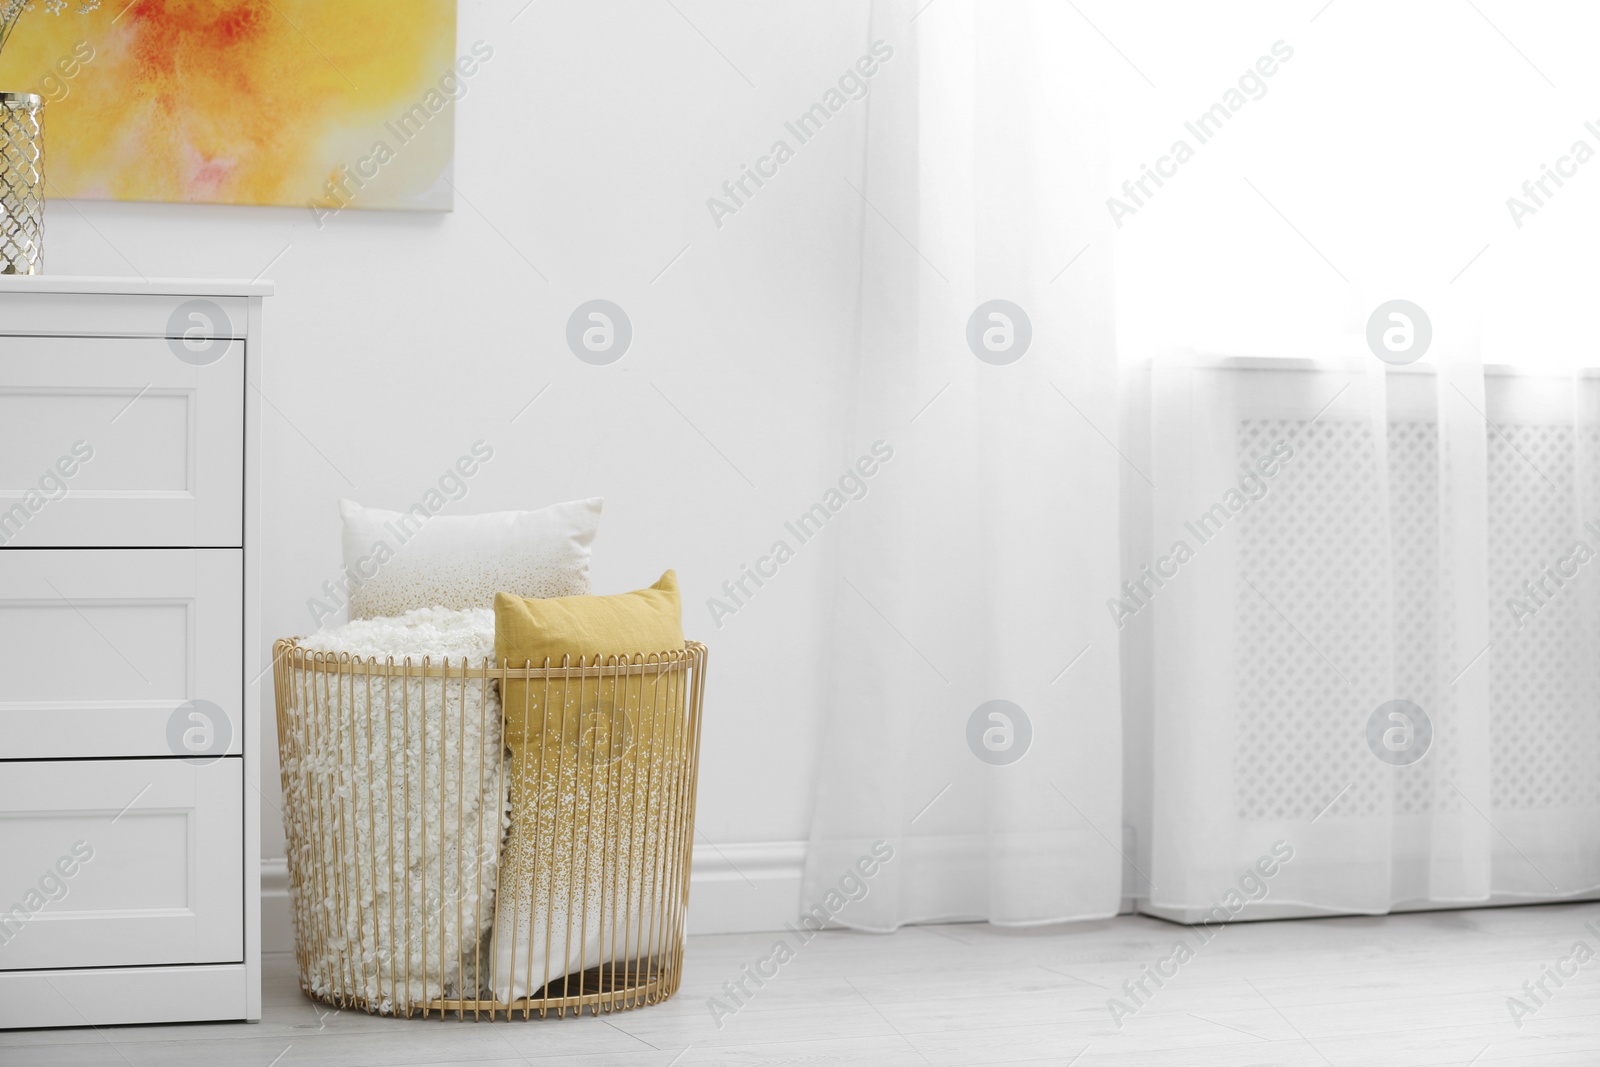 Photo of Basket with soft plaid and pillows in room. Space for text